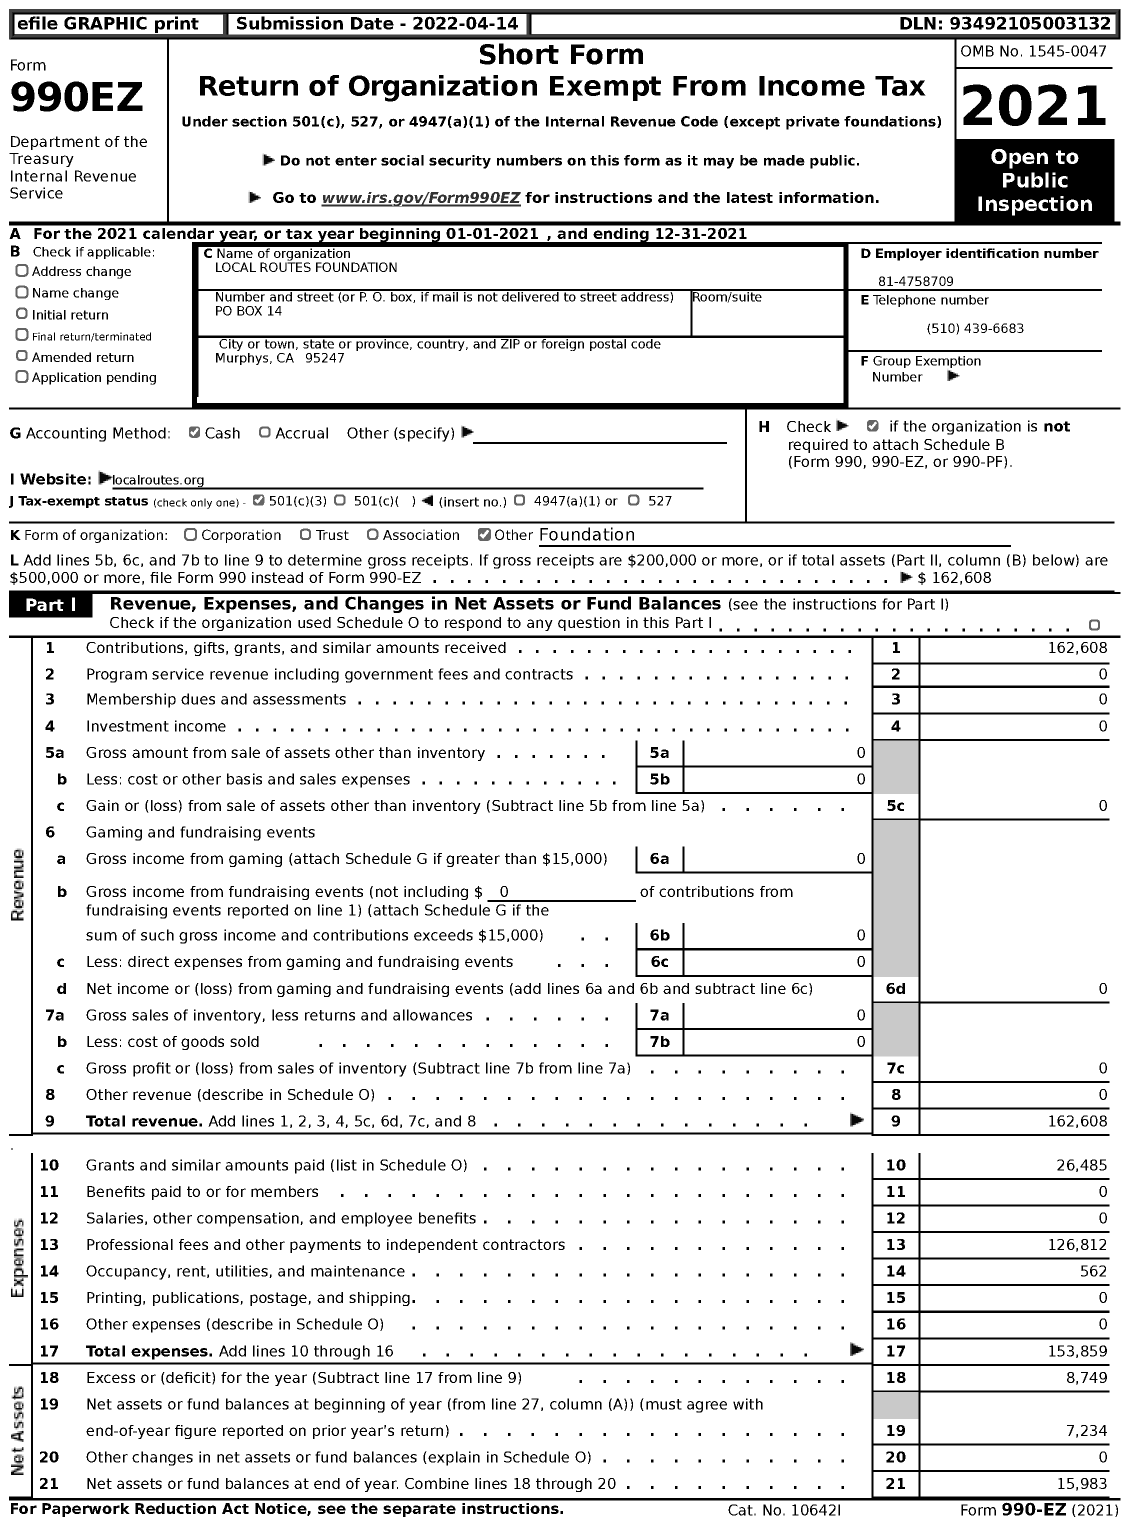 Image of first page of 2021 Form 990EZ for Local Routes Foundation